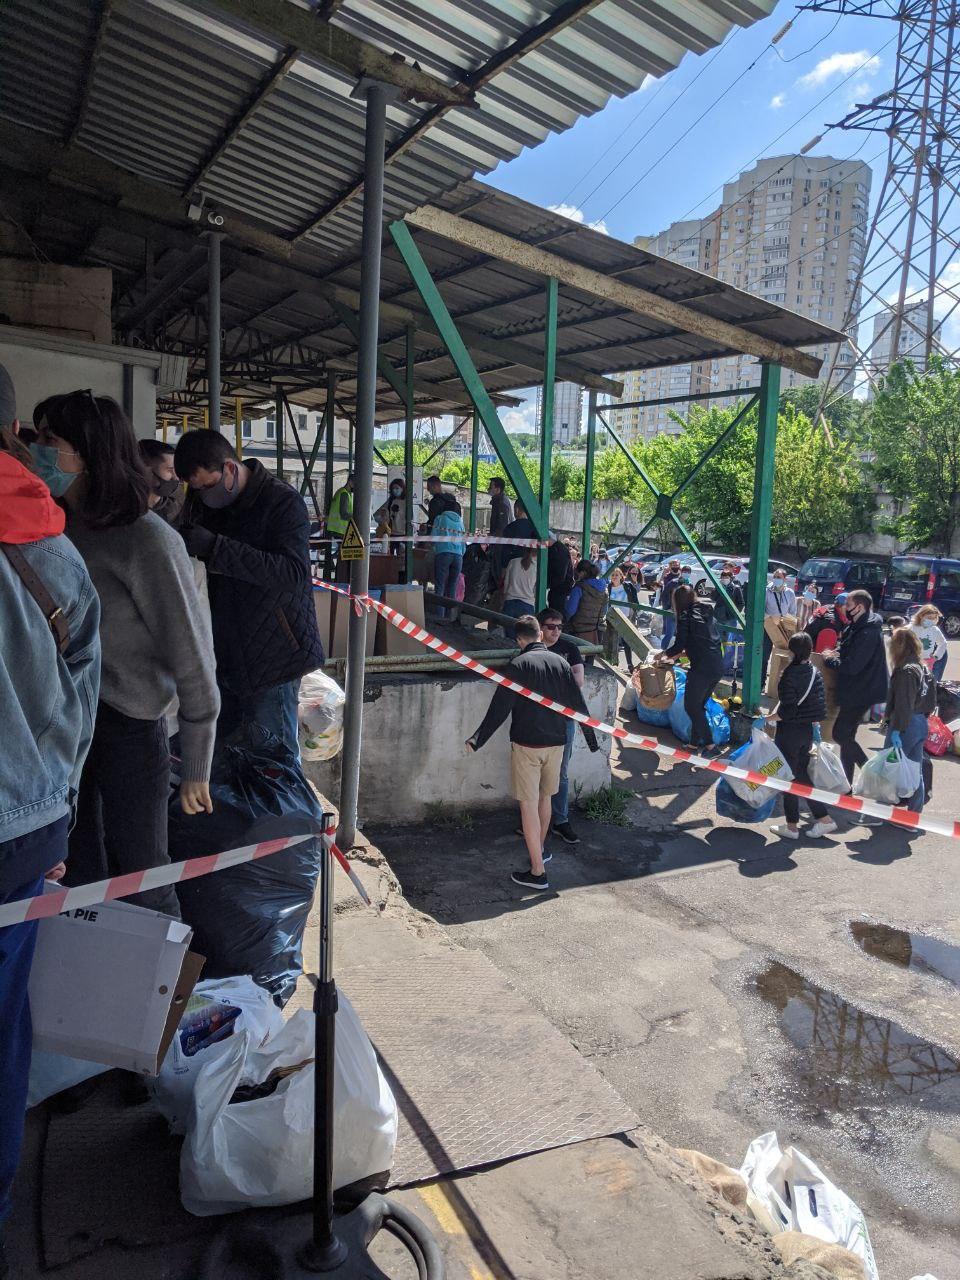 The lines to the No Waste Ukraine recycling station during the quarantine in spring 2020. Photo from No Waste Ukraine Facebook page ~